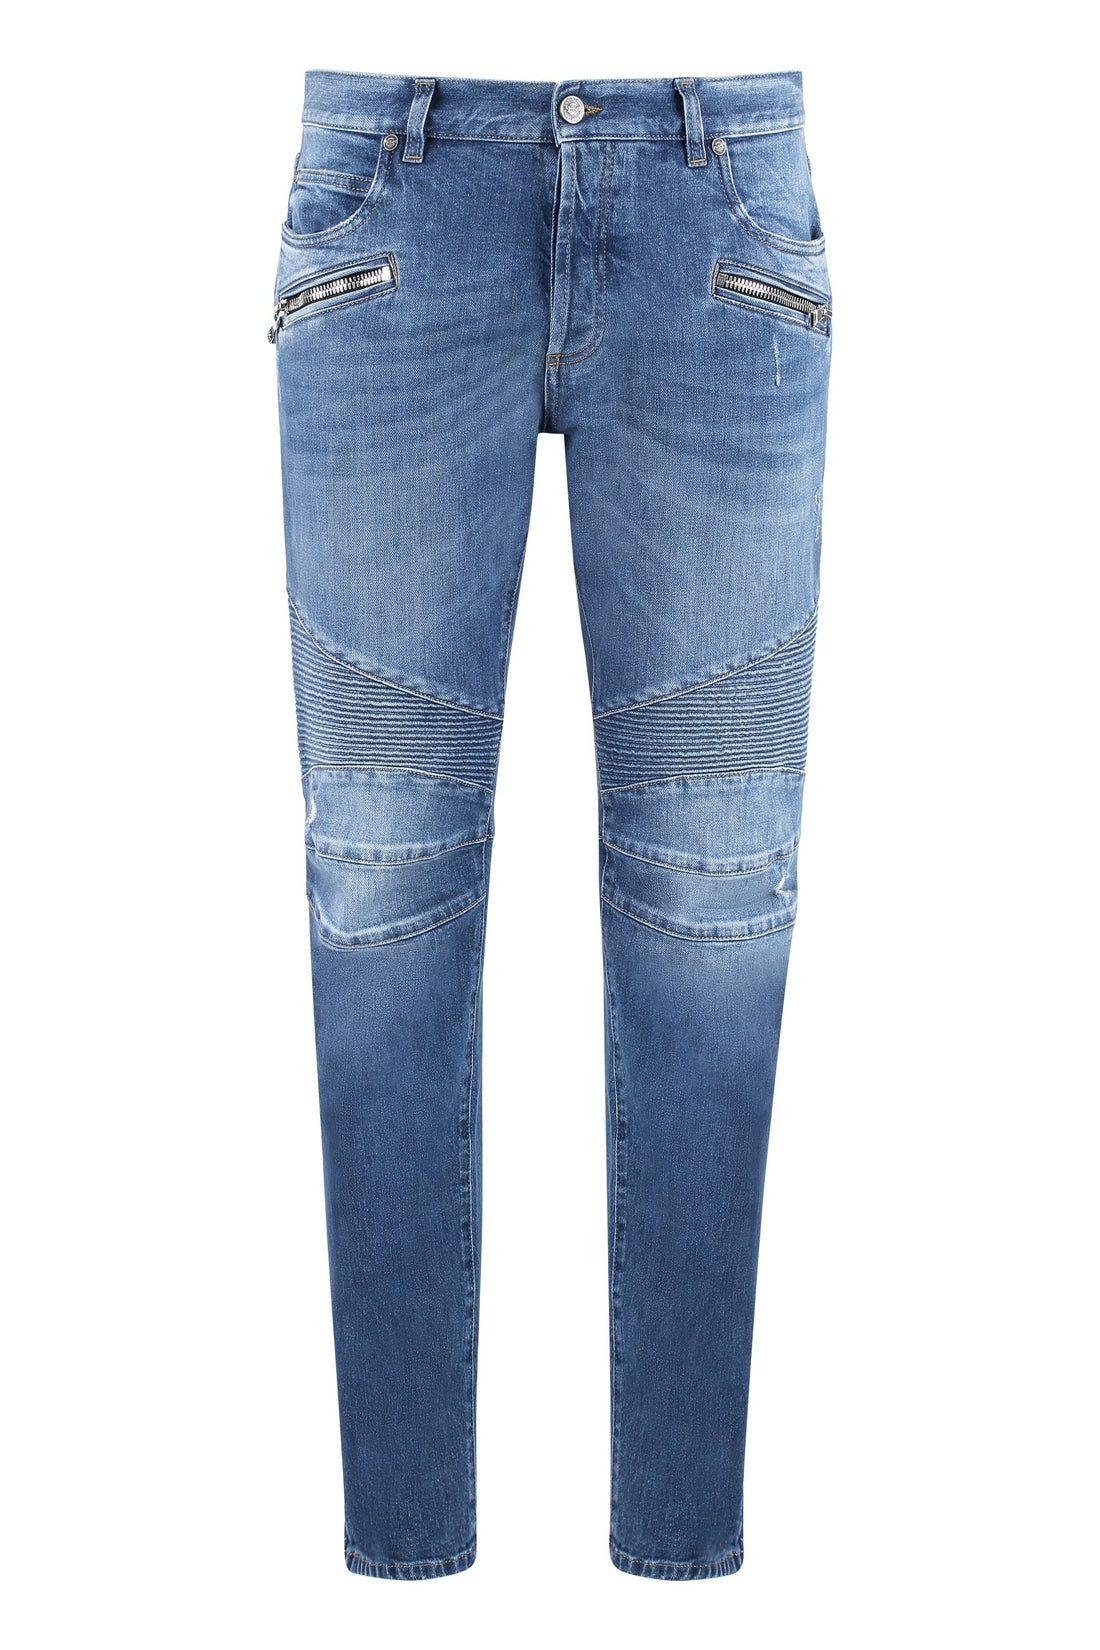 Balmain-OUTLET-SALE-Tapered fit jeans-ARCHIVIST